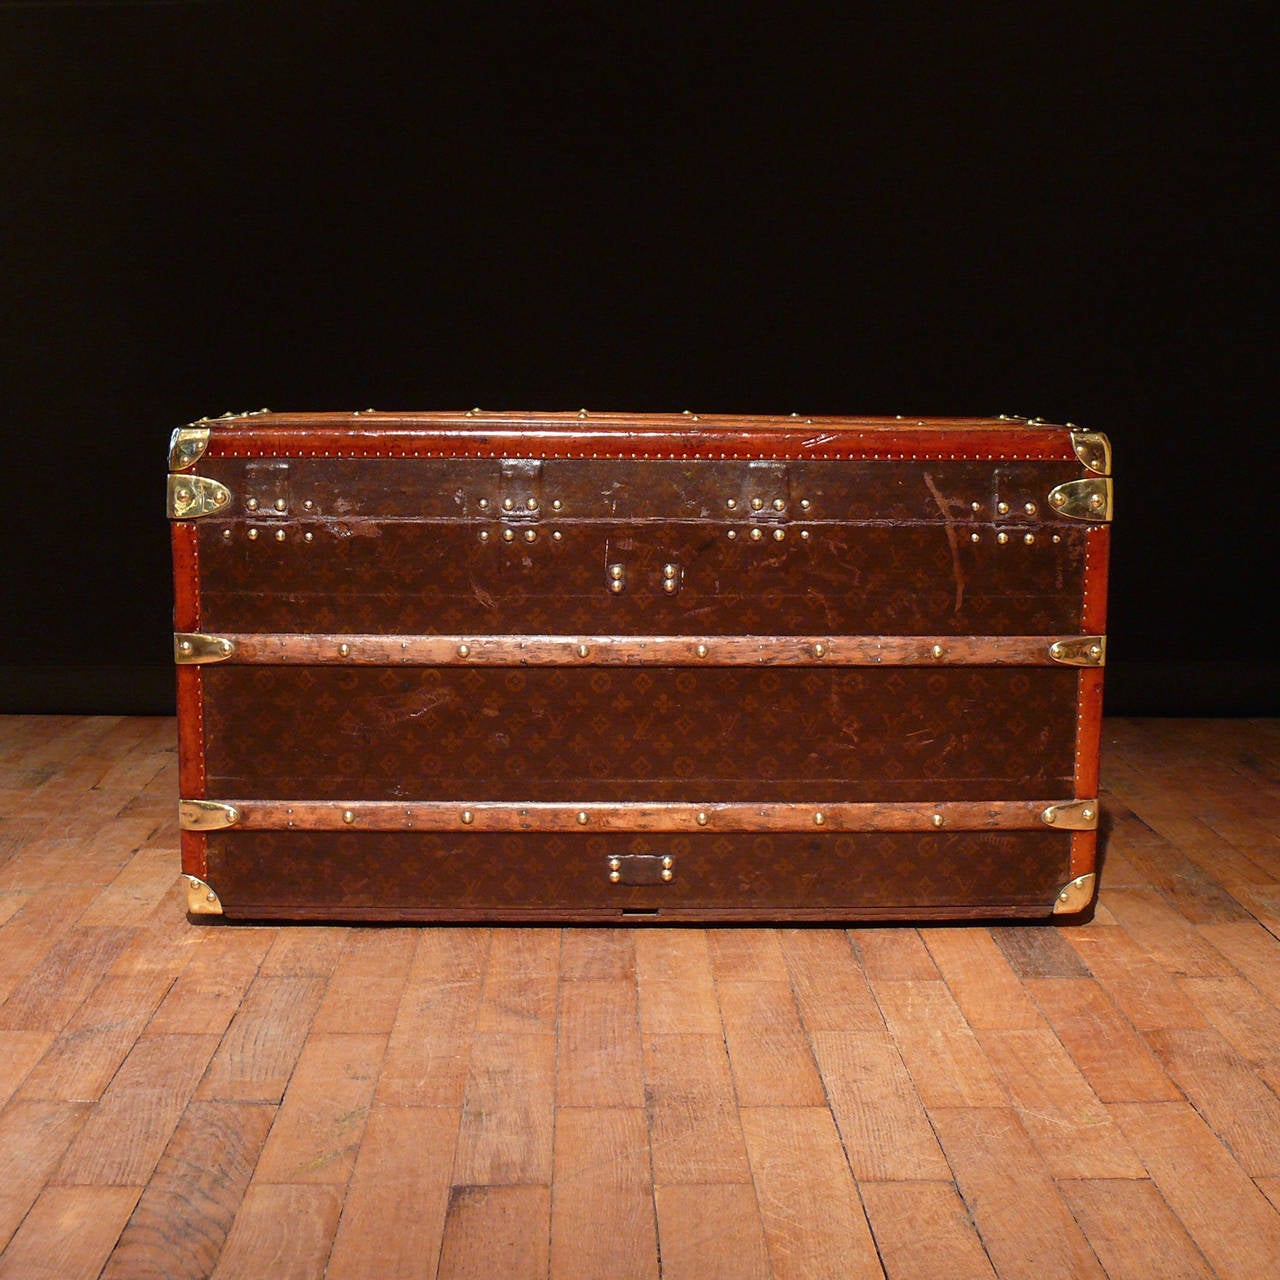 Delightful Louis Vuitton Shoe Trunk with Striped Livery, circa 1935 1